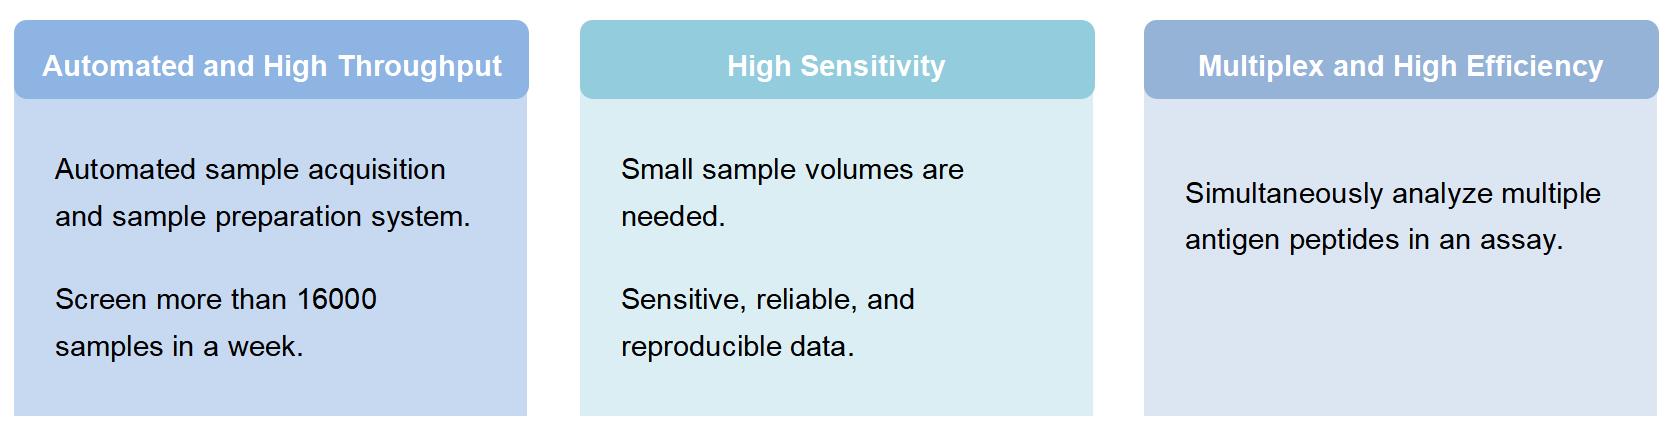 Features & Advantages of the Flow Cytometry Assay